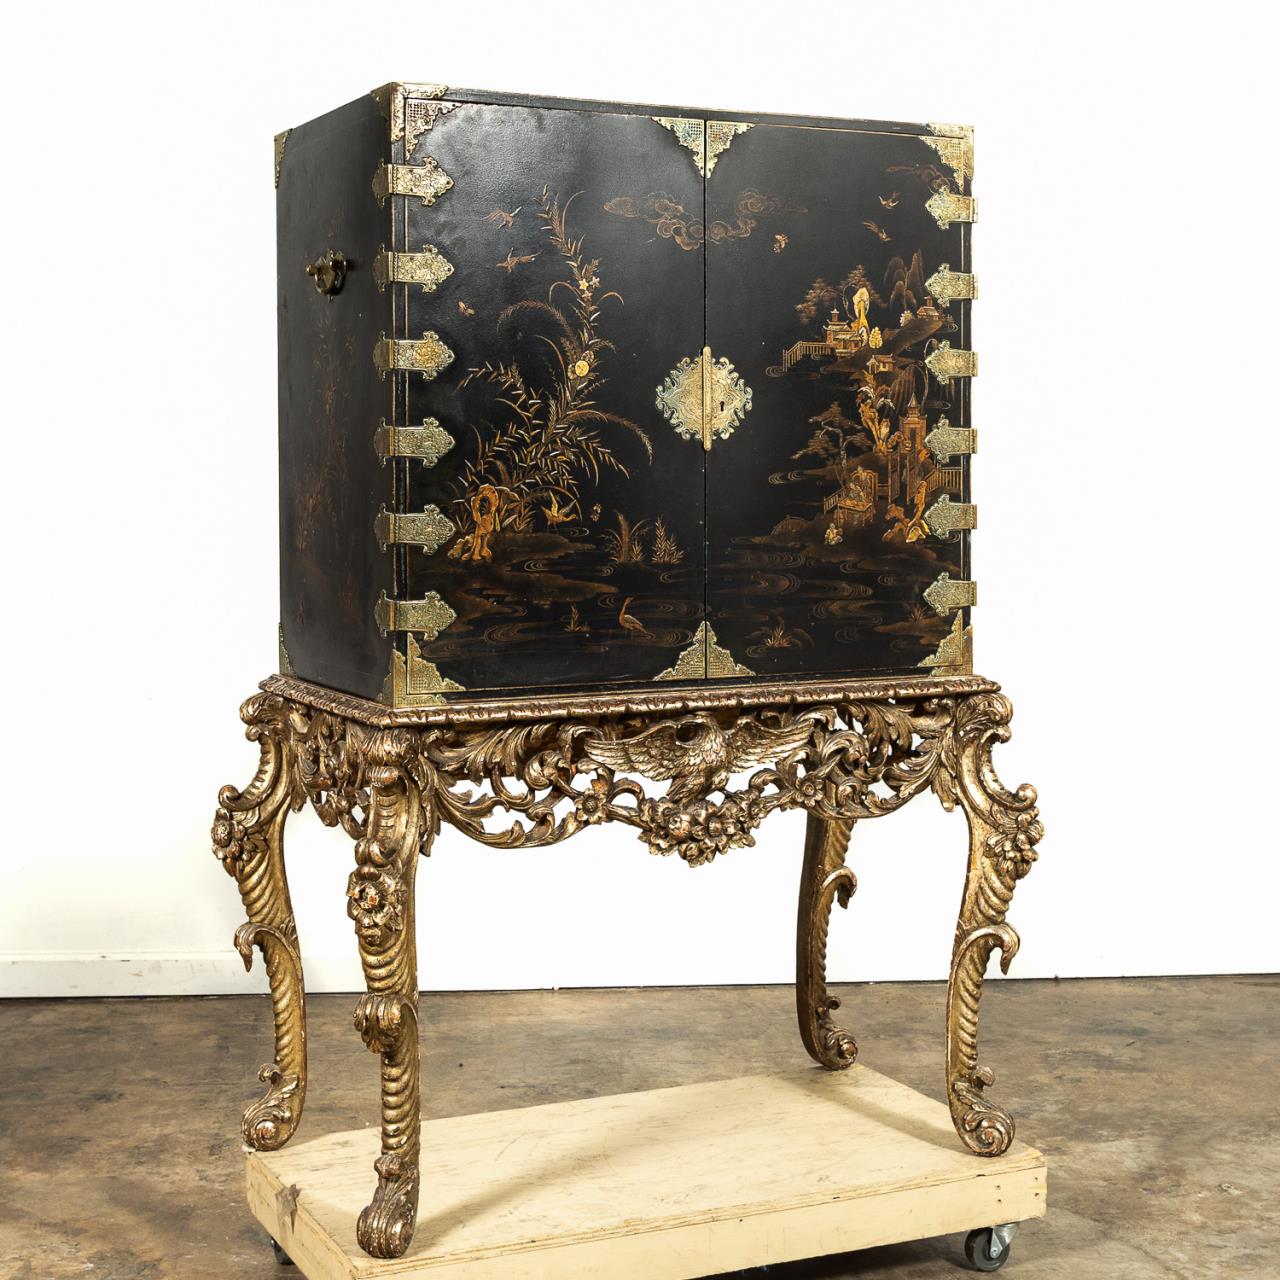 CHINOISERIE LACQUER CABINET ON 35d5c9